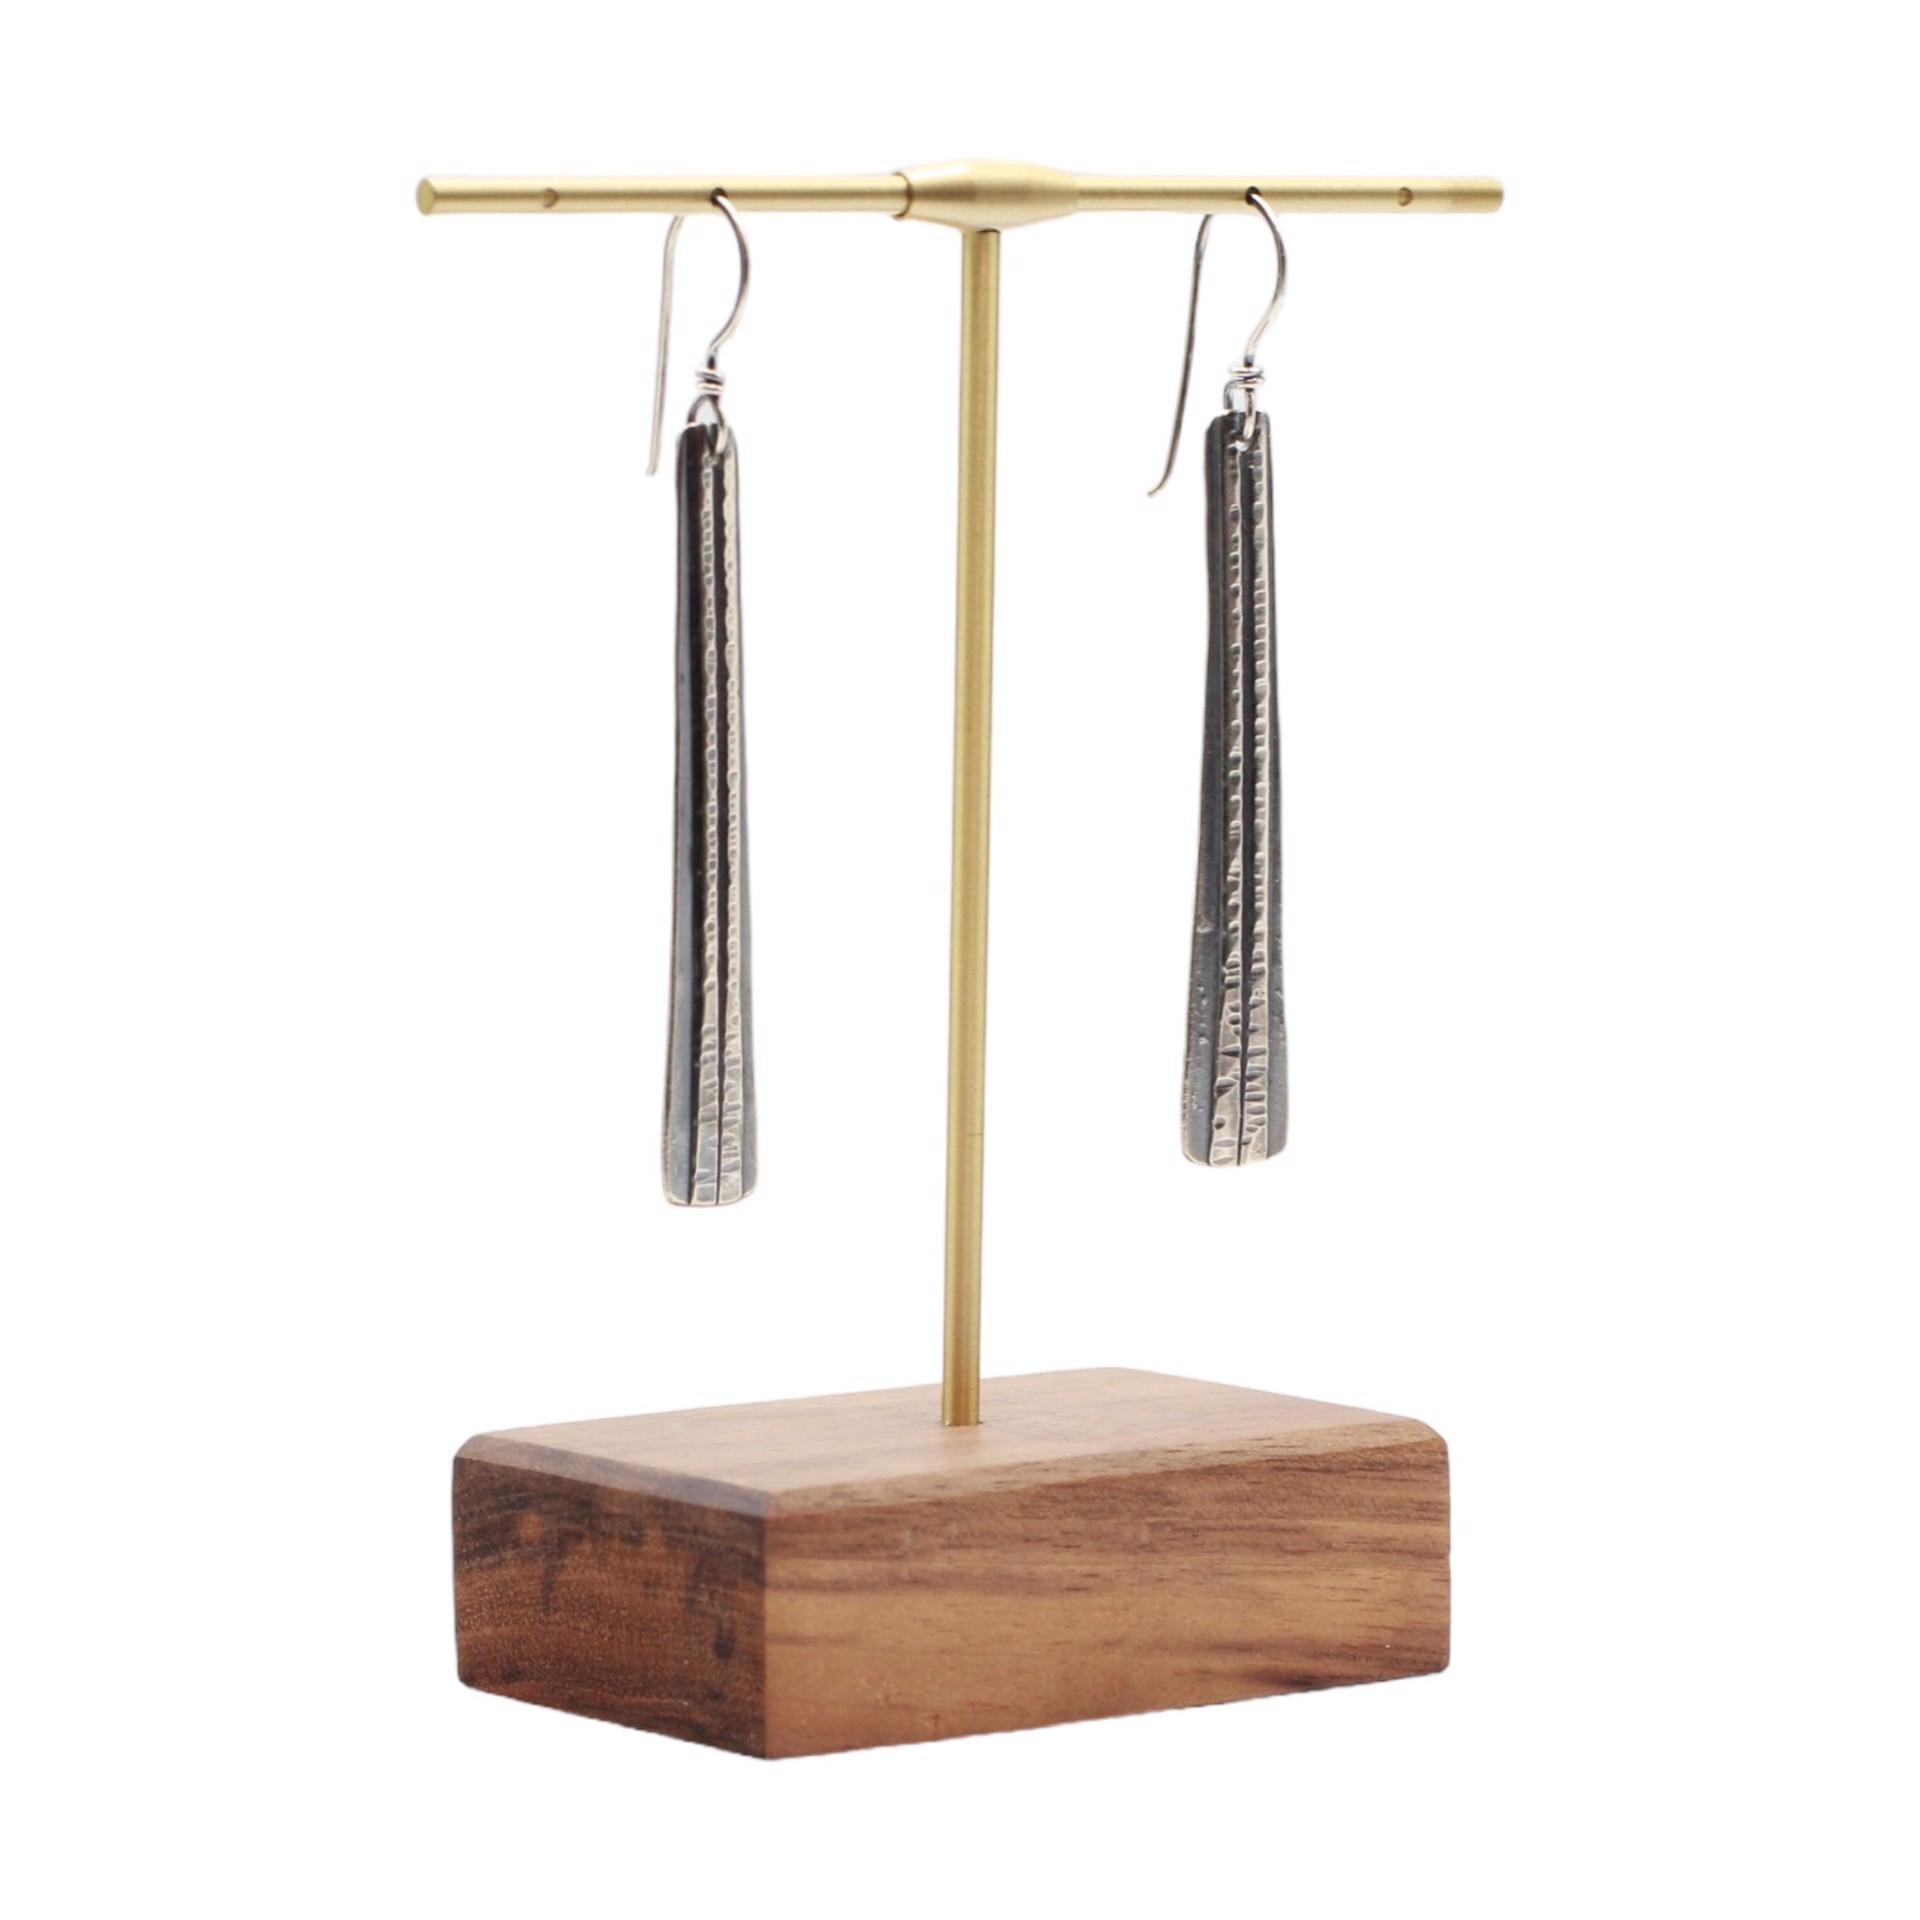 Everyday Adventures Earrings - long (Sterling Silver) by Emily Dubrawski